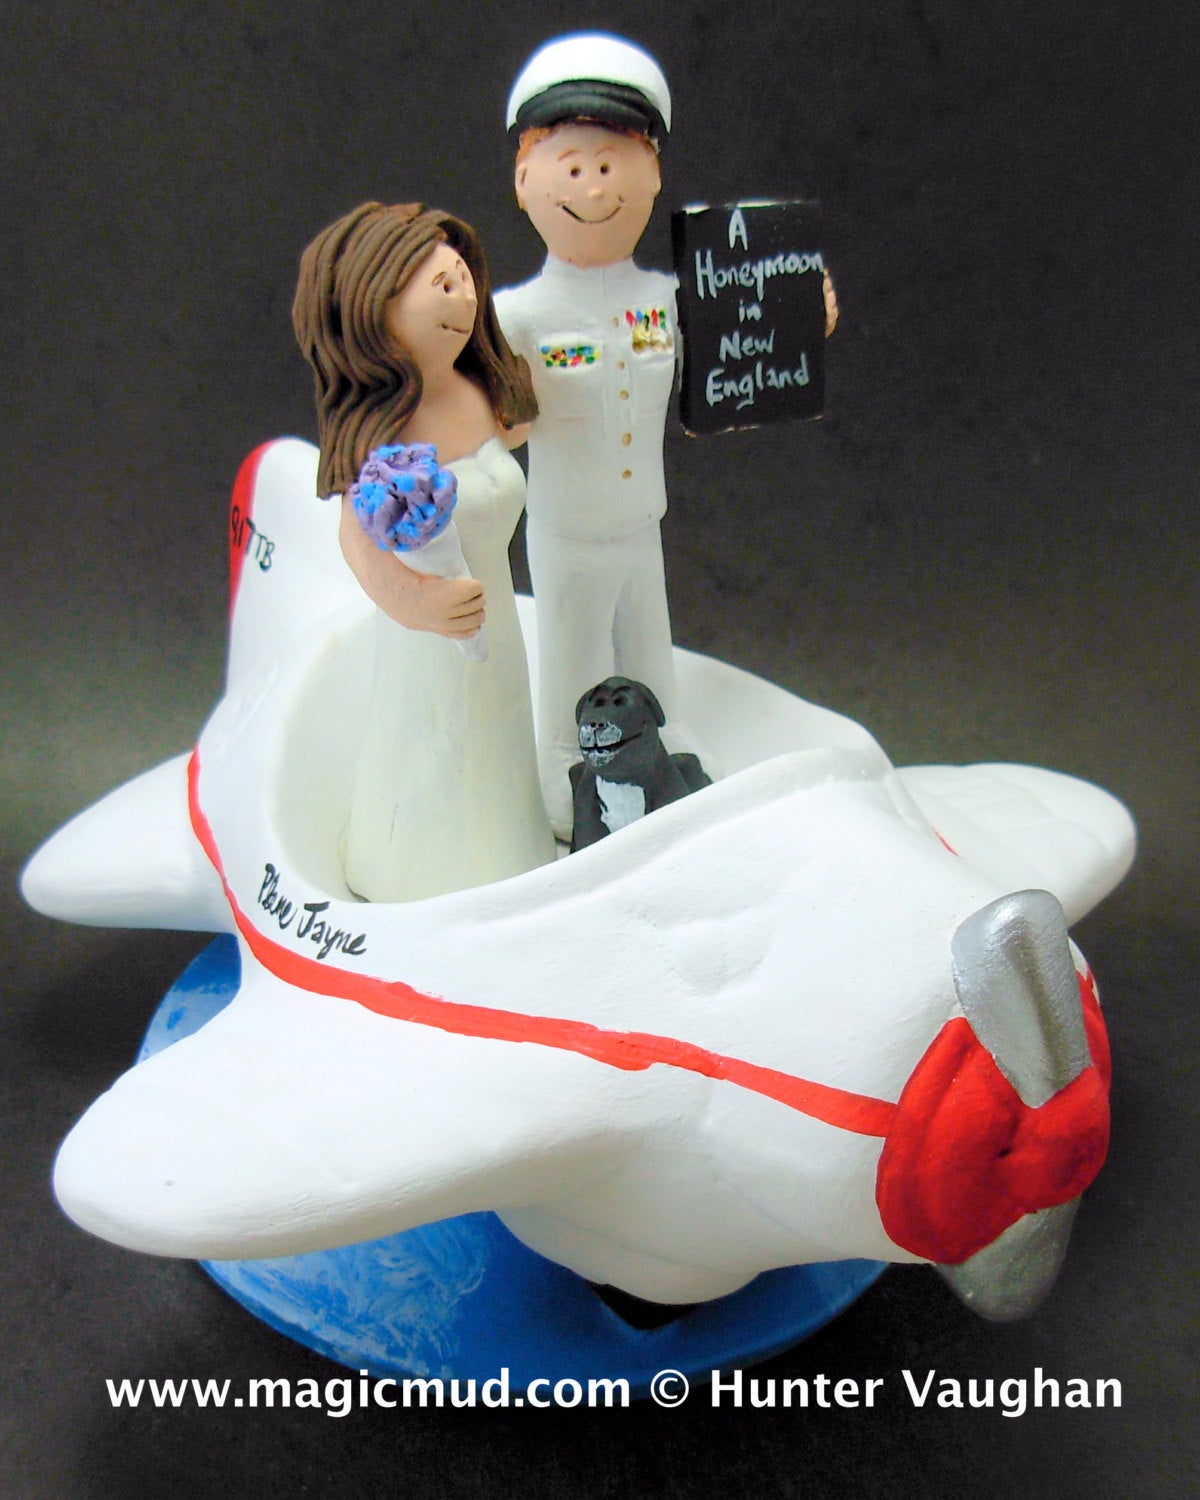 Airplane Pilot's Wedding Cake Topper - Bride and Groom in Airplane Wedding Cake Topper - Wedding Cake Topper for a Pilot- Pilot Figurine - iWeddingCakeToppers